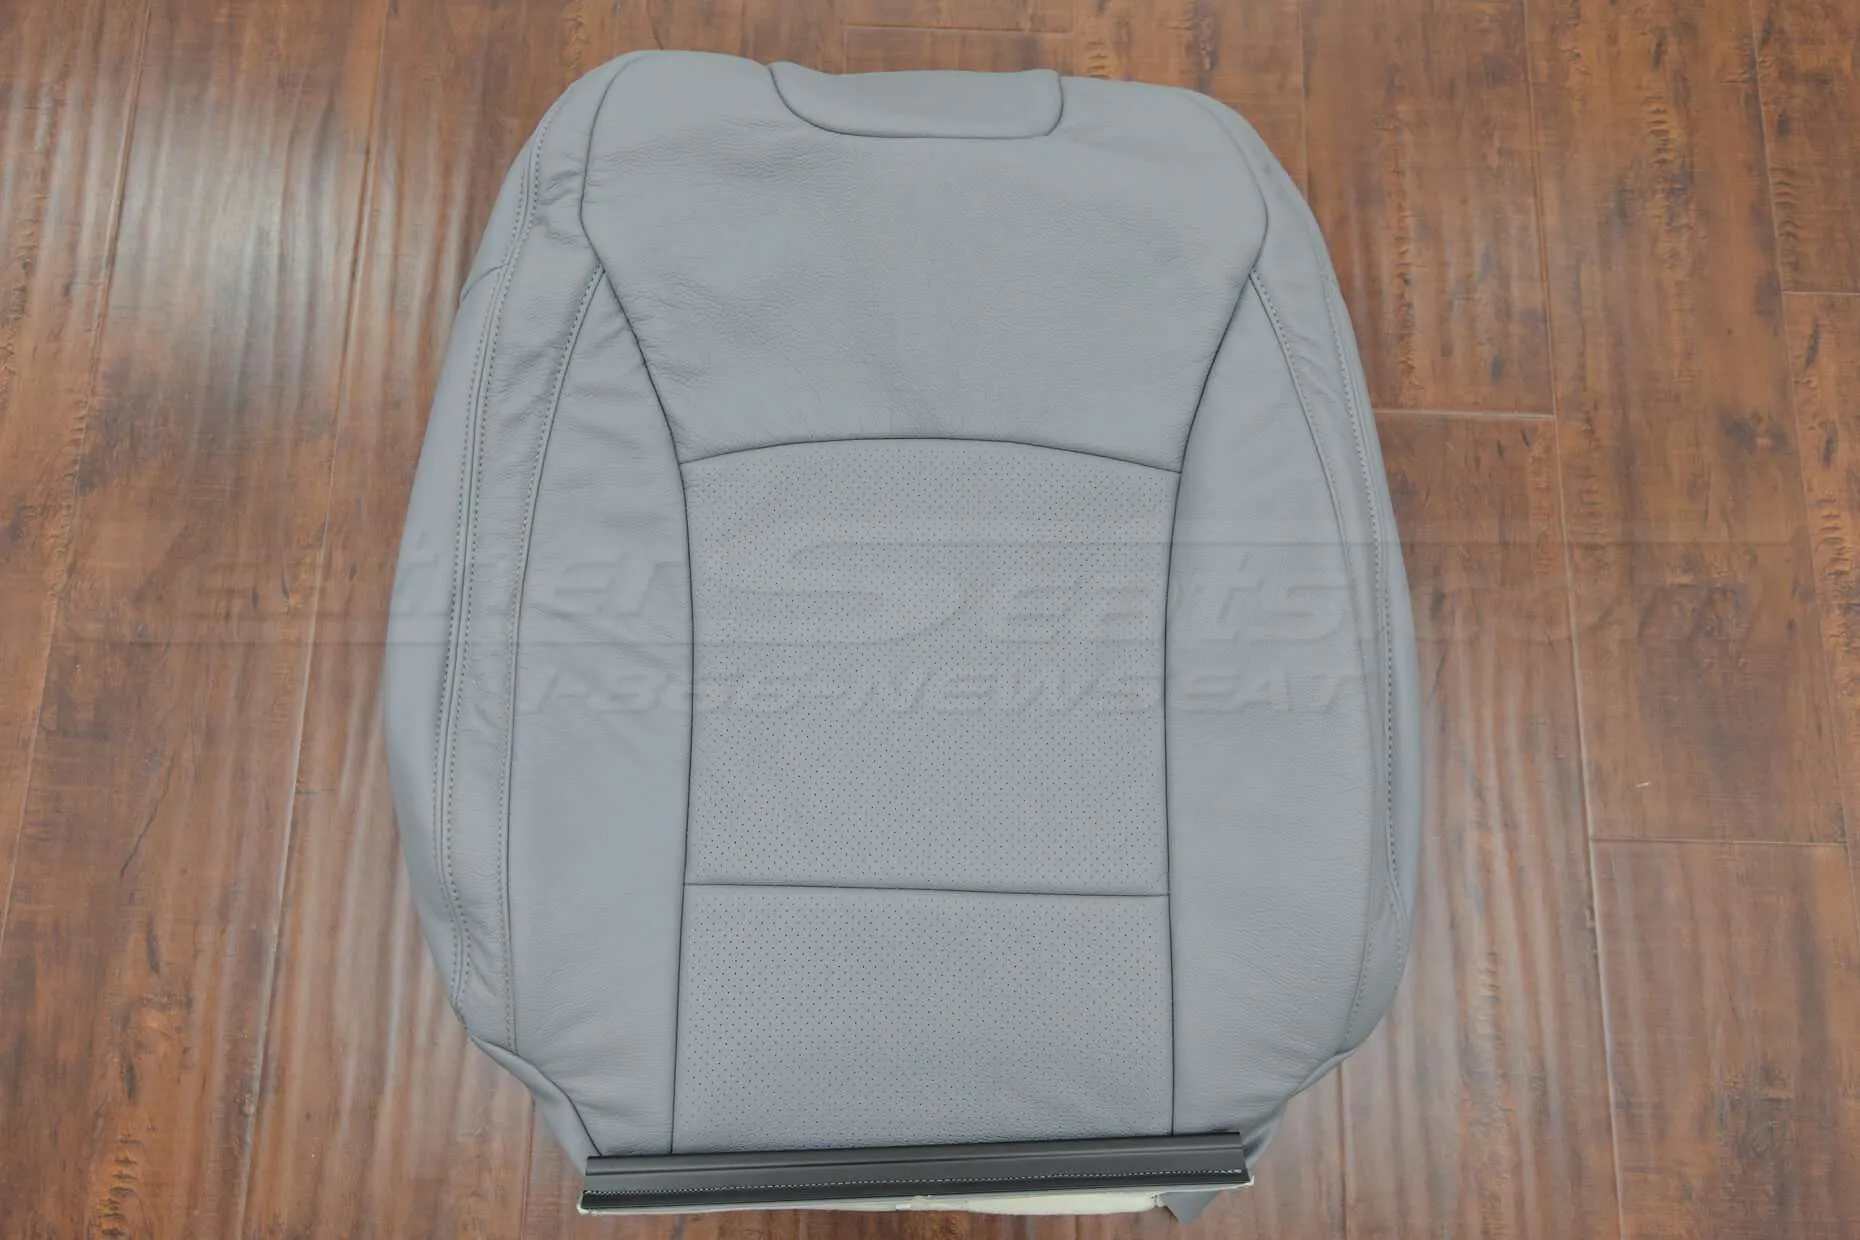 Subaru Legacy front backrest upholstery in crater grey